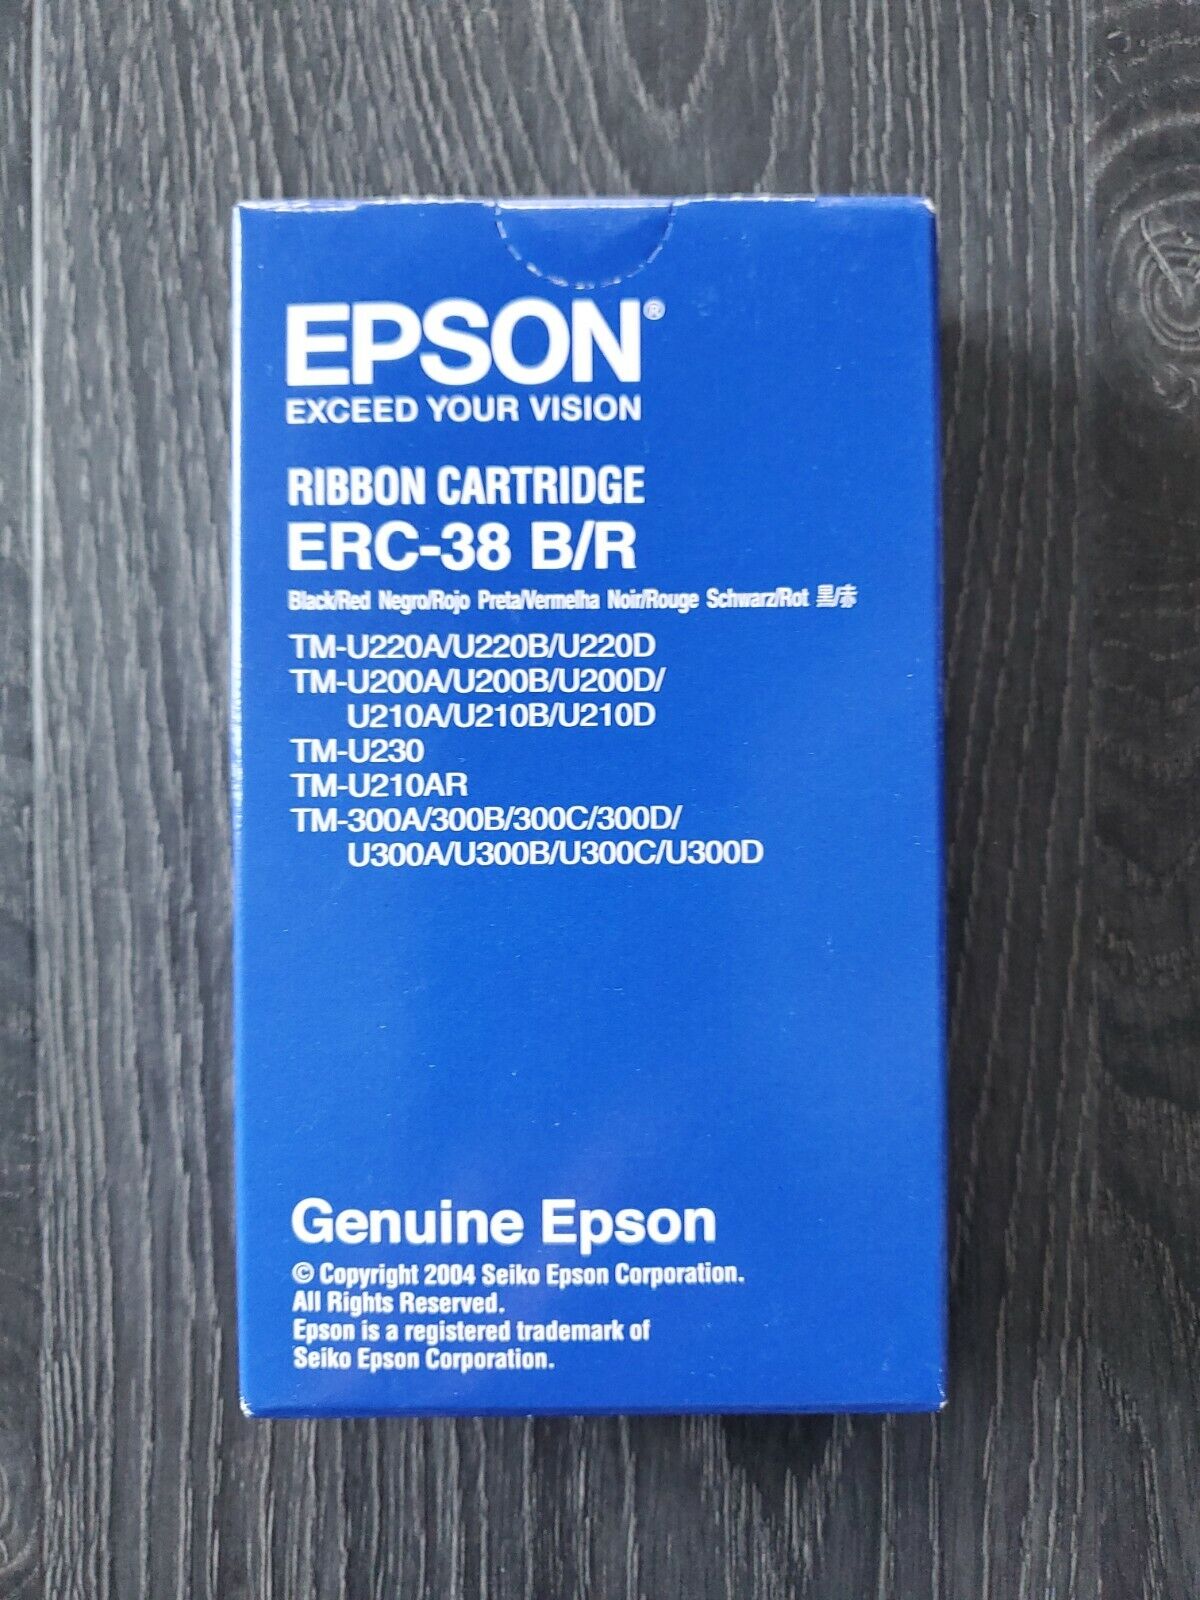 Epson ERC-38 B/R Black Red Ink Ribbon Cartridge BRAND NEW IN BOX, Factory Sealed